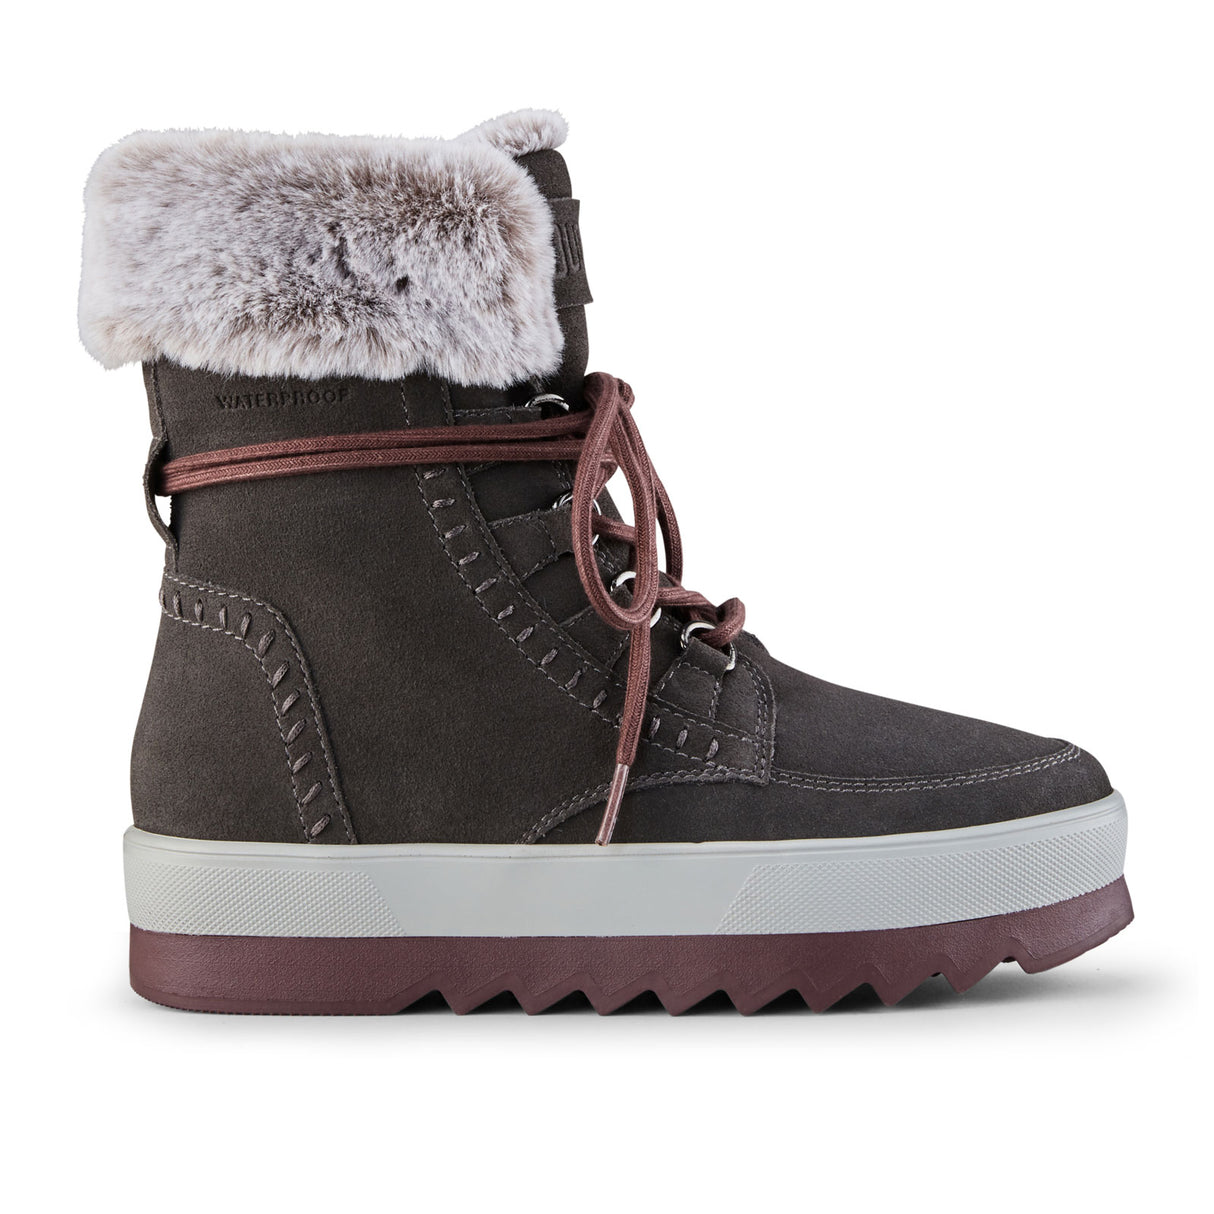 Cougar Vanetta Mid Winter Boot (Women) - Pewter Boots - Winter - Mid Boot - The Heel Shoe Fitters